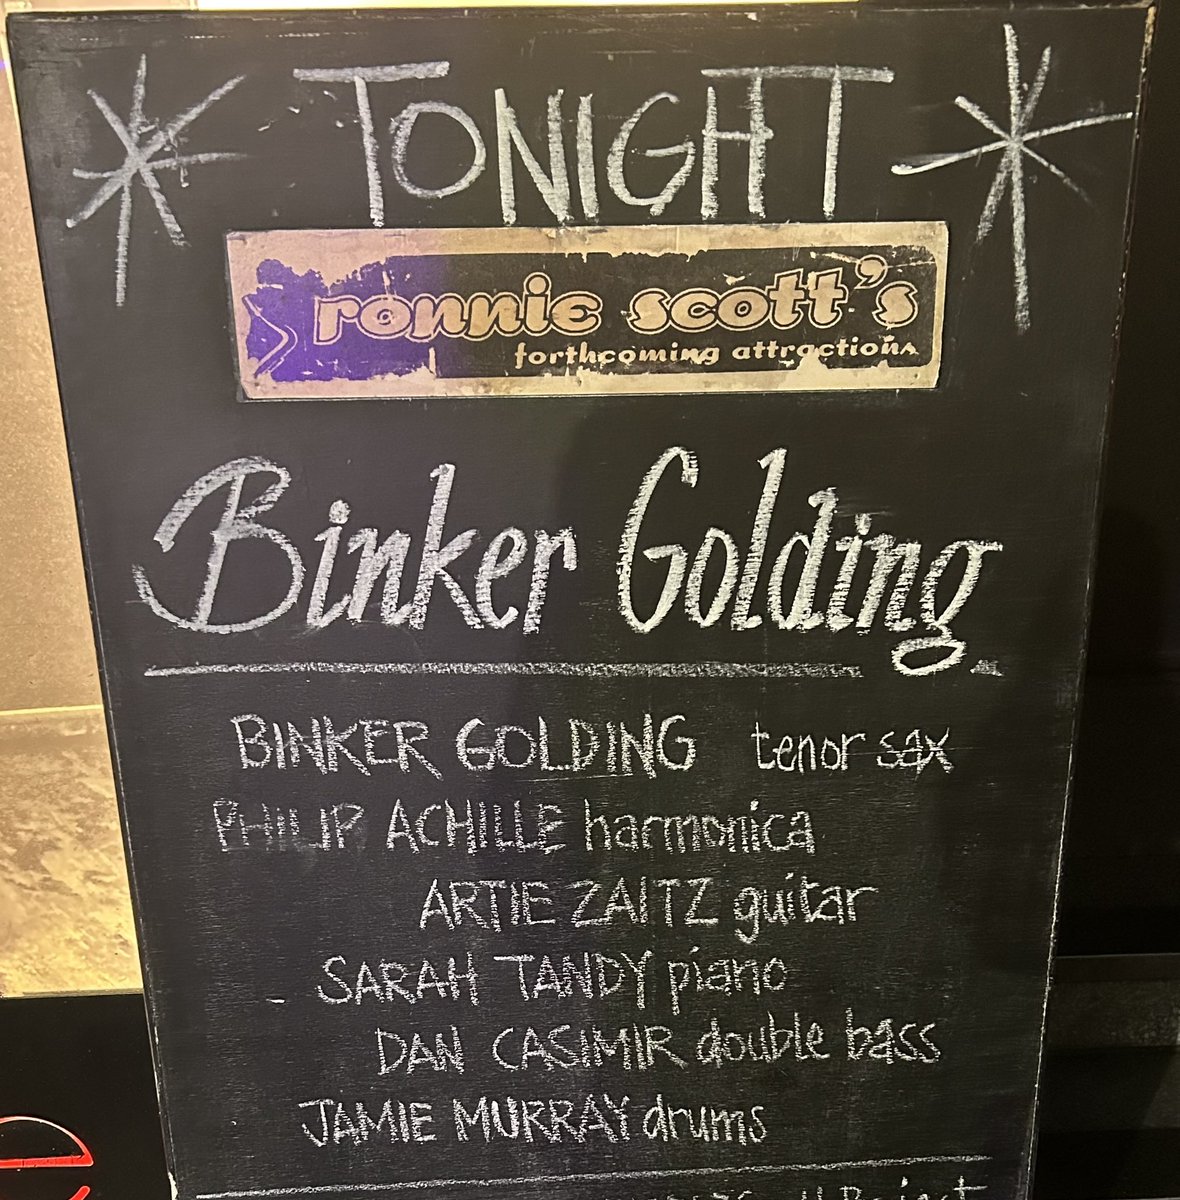 So, @BinkerGolding told me last night to call all my friends and tell you I’d seen @SarahTandyPiano, Philip Achille, Daniel Casimir, Artie Zaitz & Jamie Murray at @officialronnies. What a band! What a gig! (2nd set). Great new tunes and a version of ‘My Two Dads’ to die for.